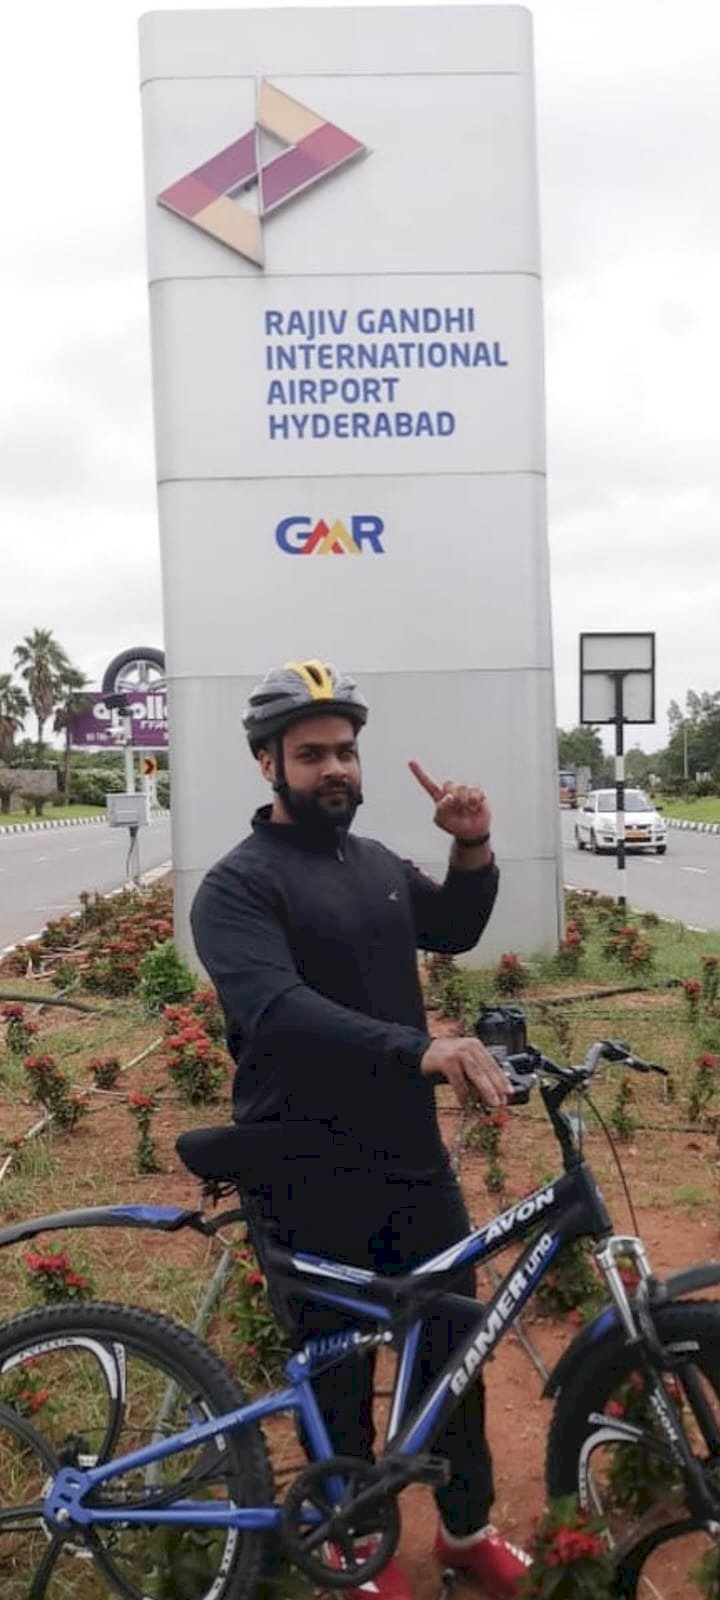 Mohsin, a physio, could not help his clientele during COVID. So he made them cycle to stay fit!